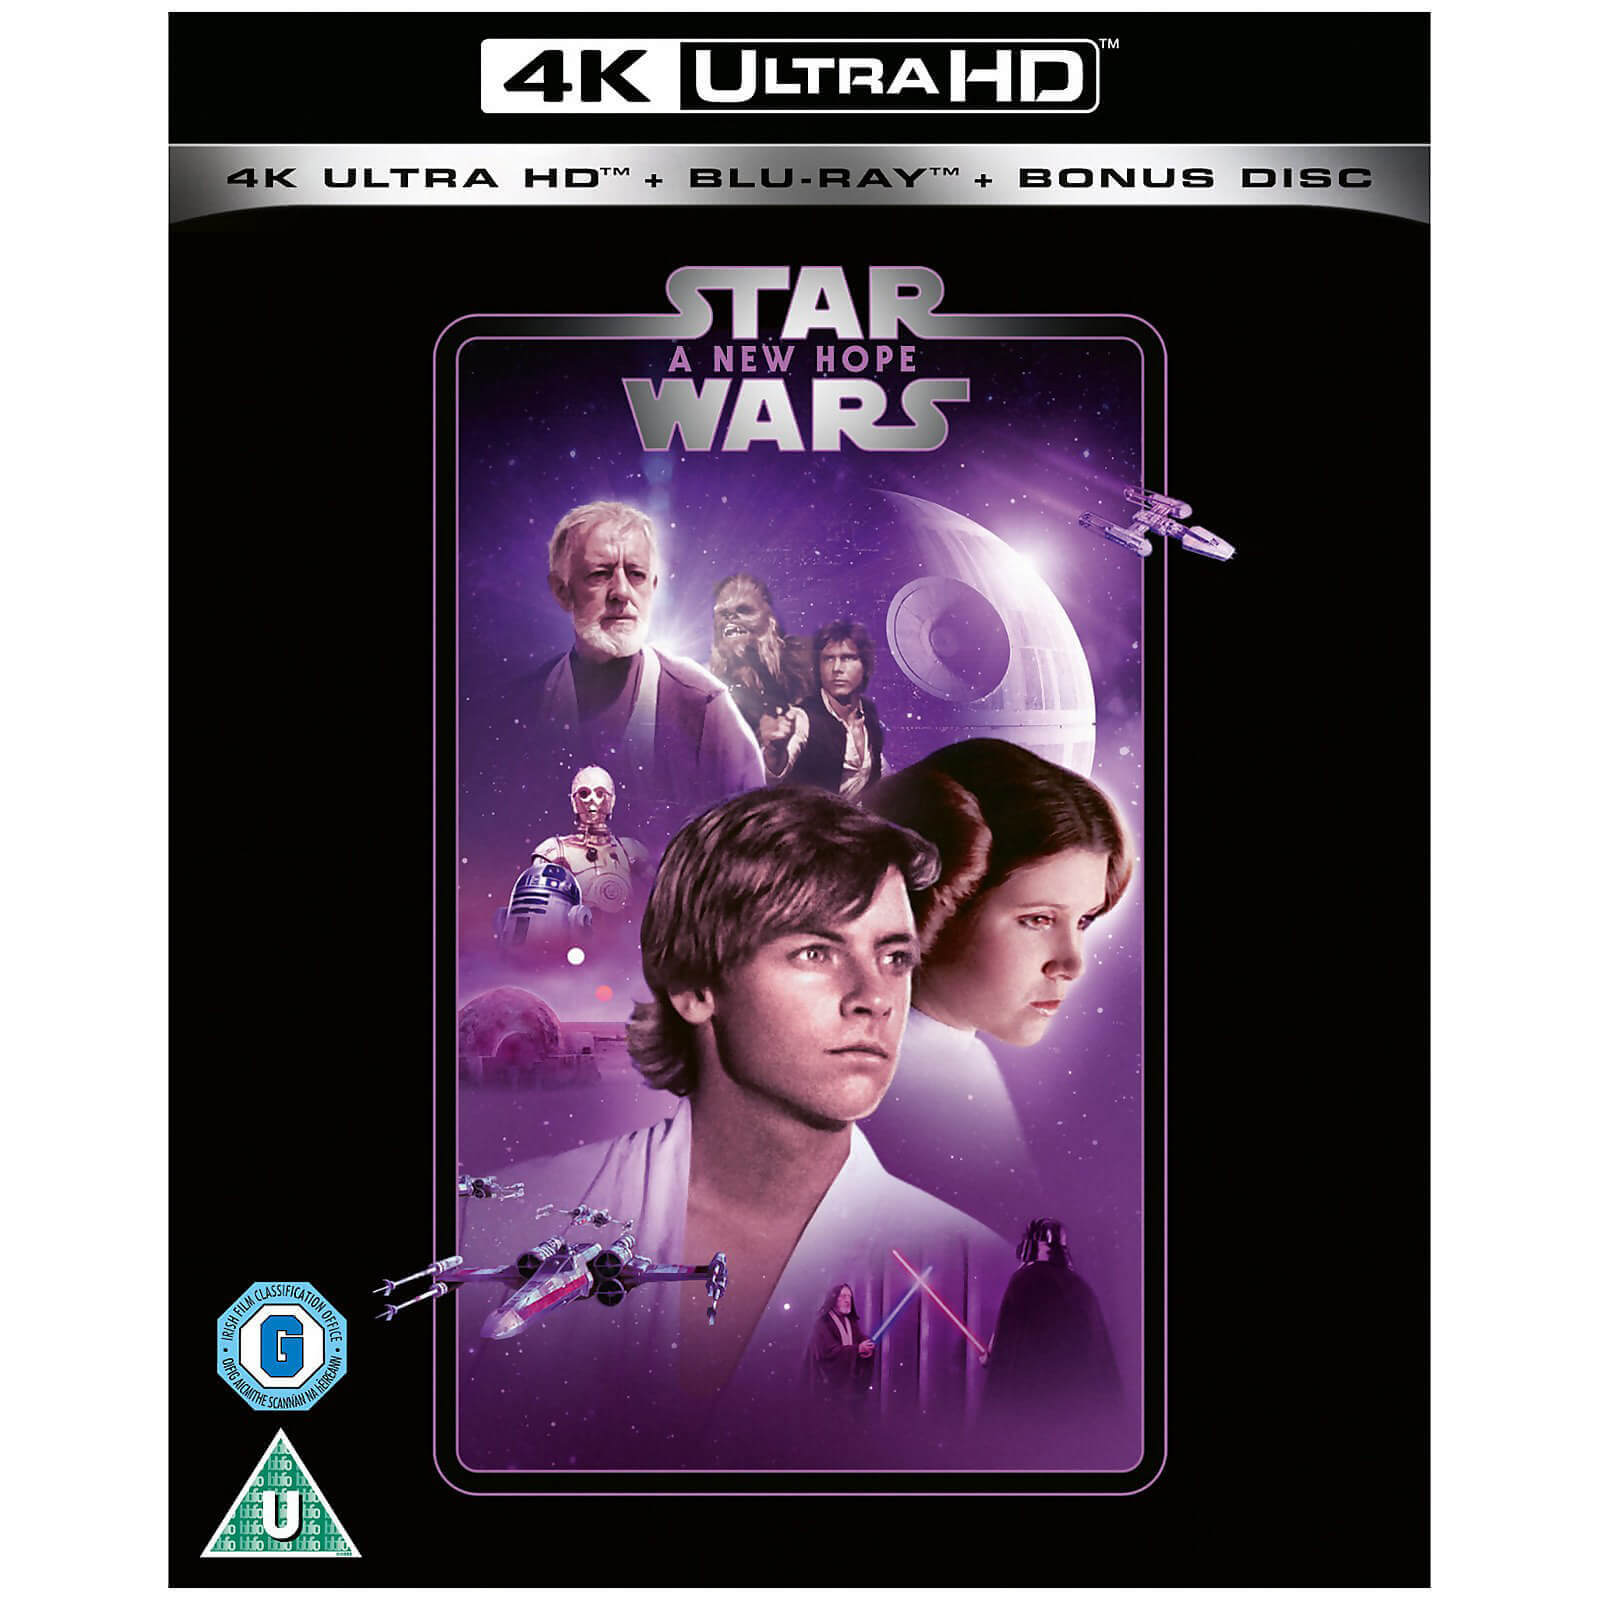 Star Wars - Episode IV - A New Hope - 4K Ultra HD (Inclusief 2D Blu-ray)